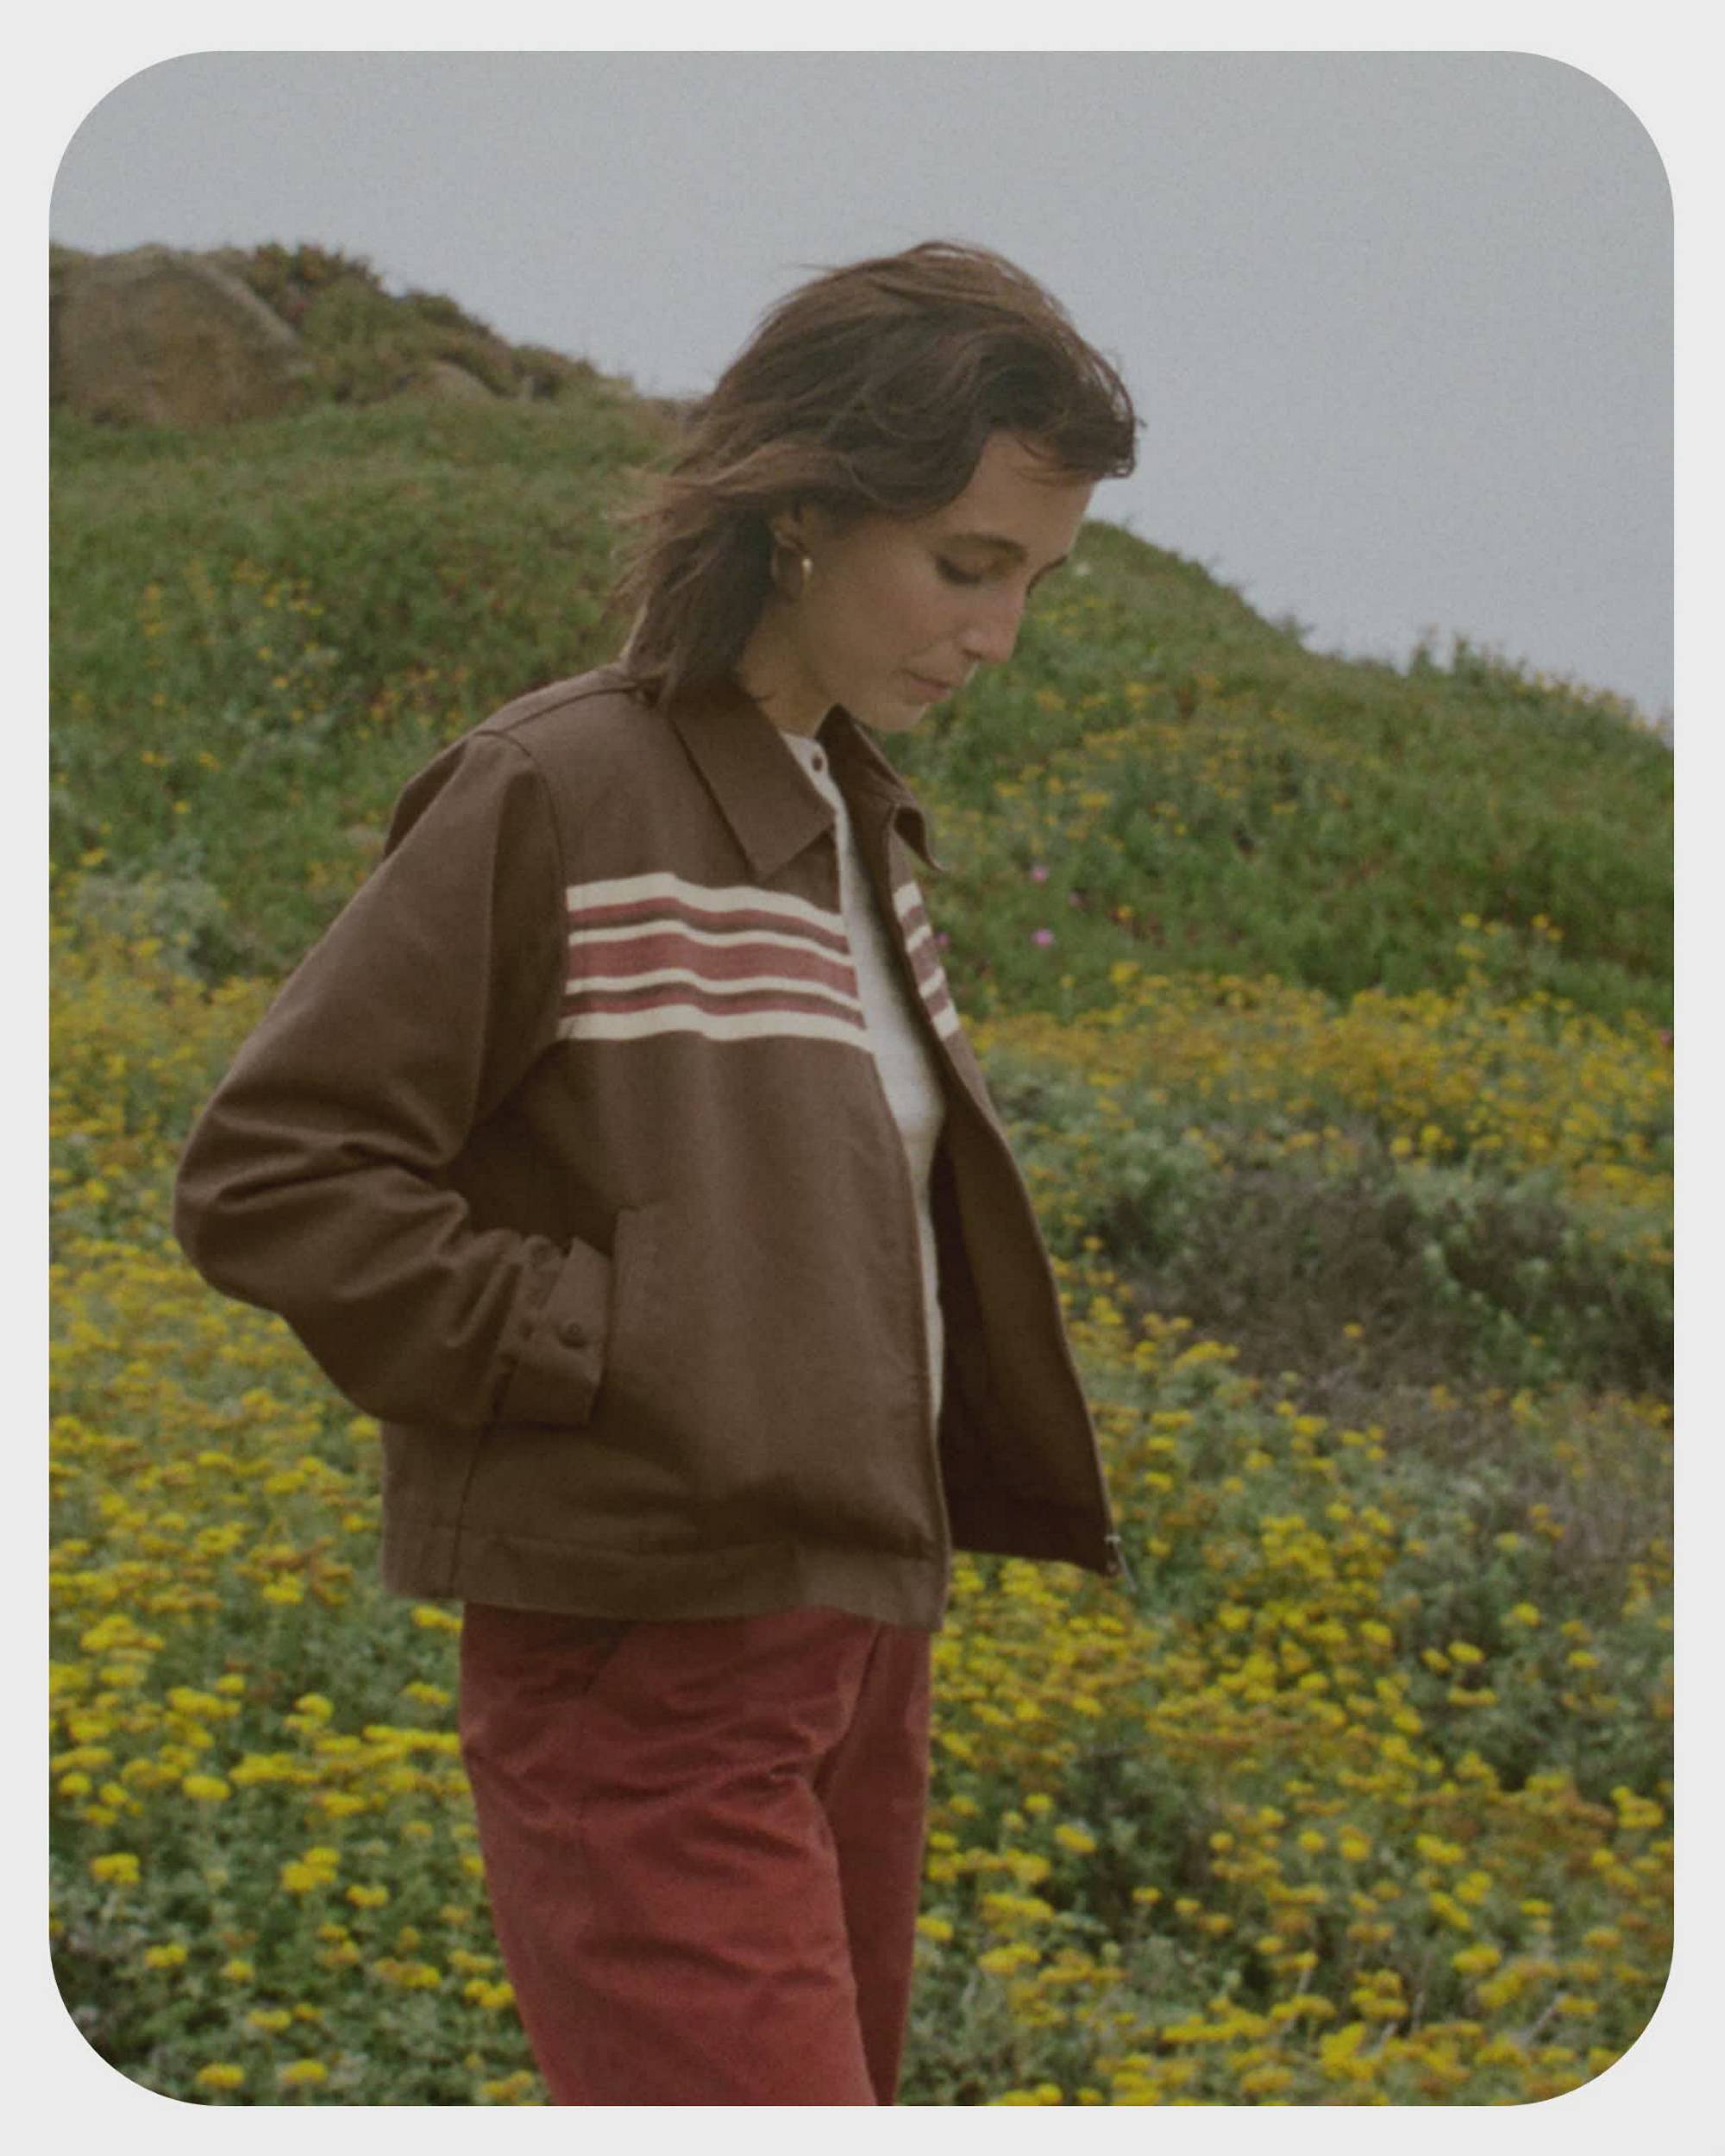 Images of woman wearing Levi's® clothing and posing in Northern California nature setting